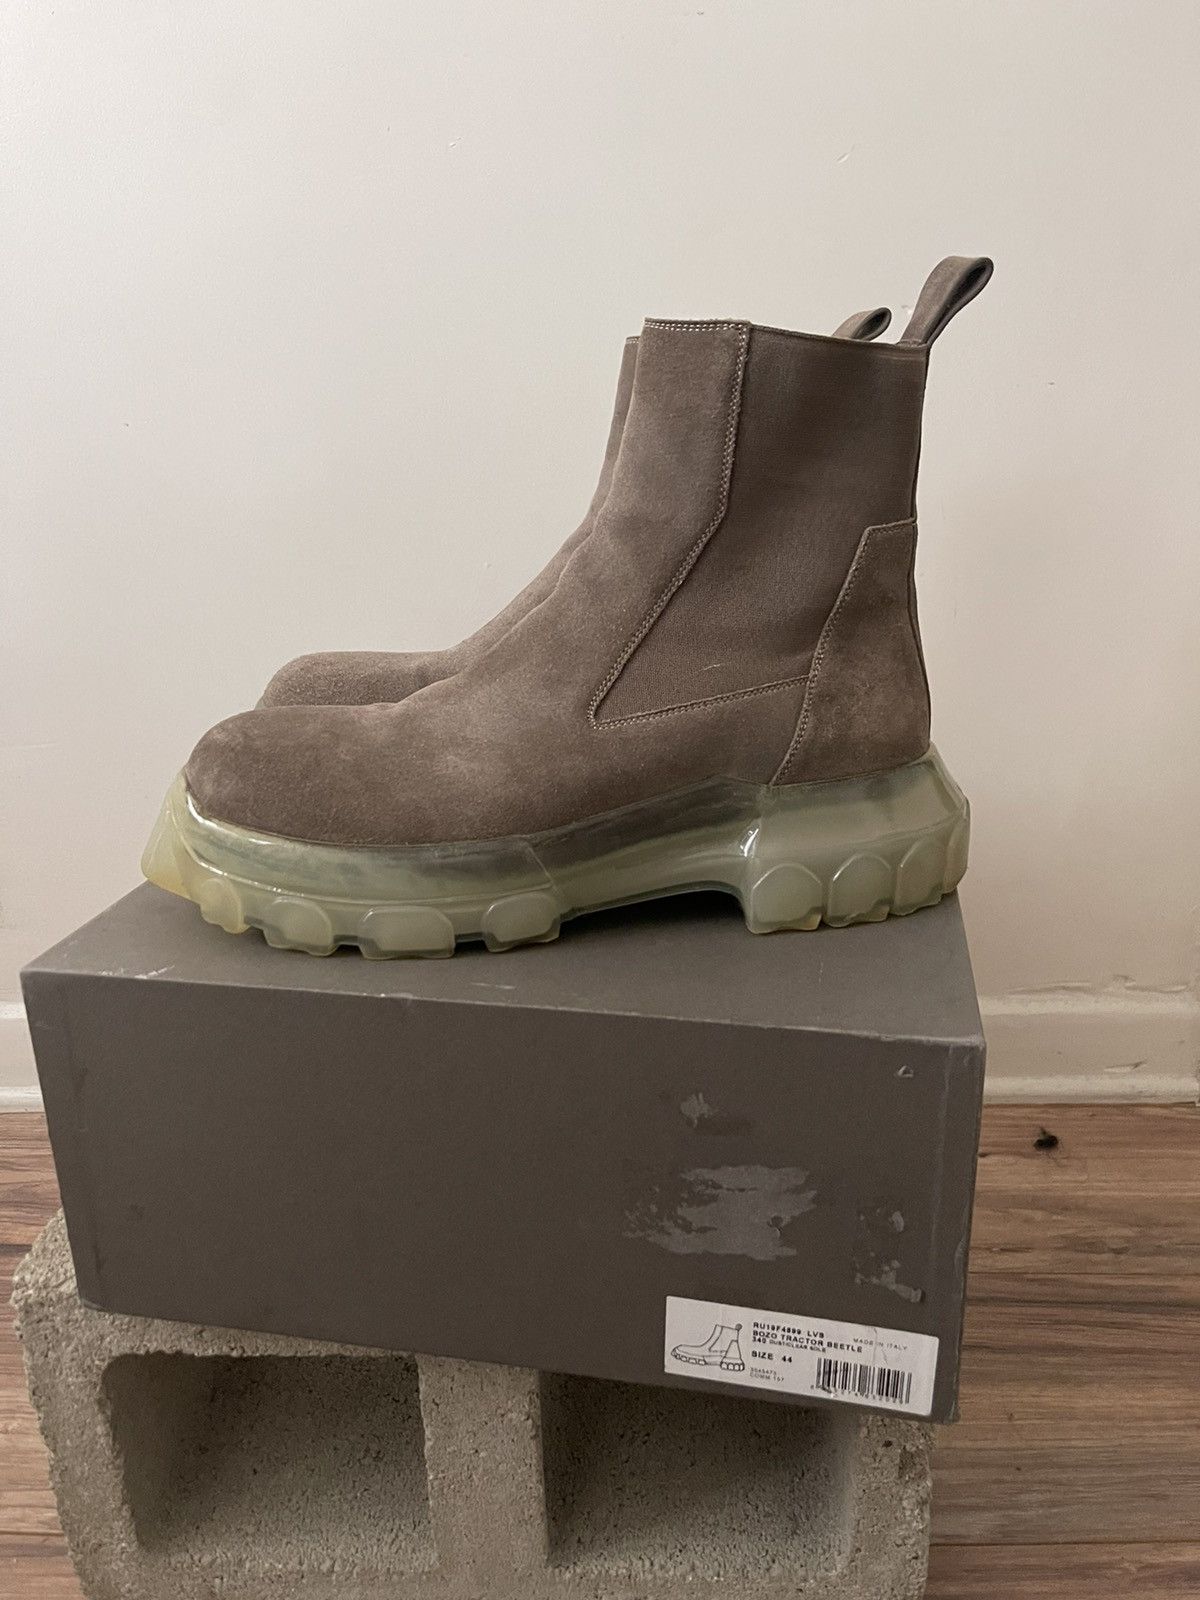 Rick Owens Suede Bozo Tractor Beetle Boots | Grailed